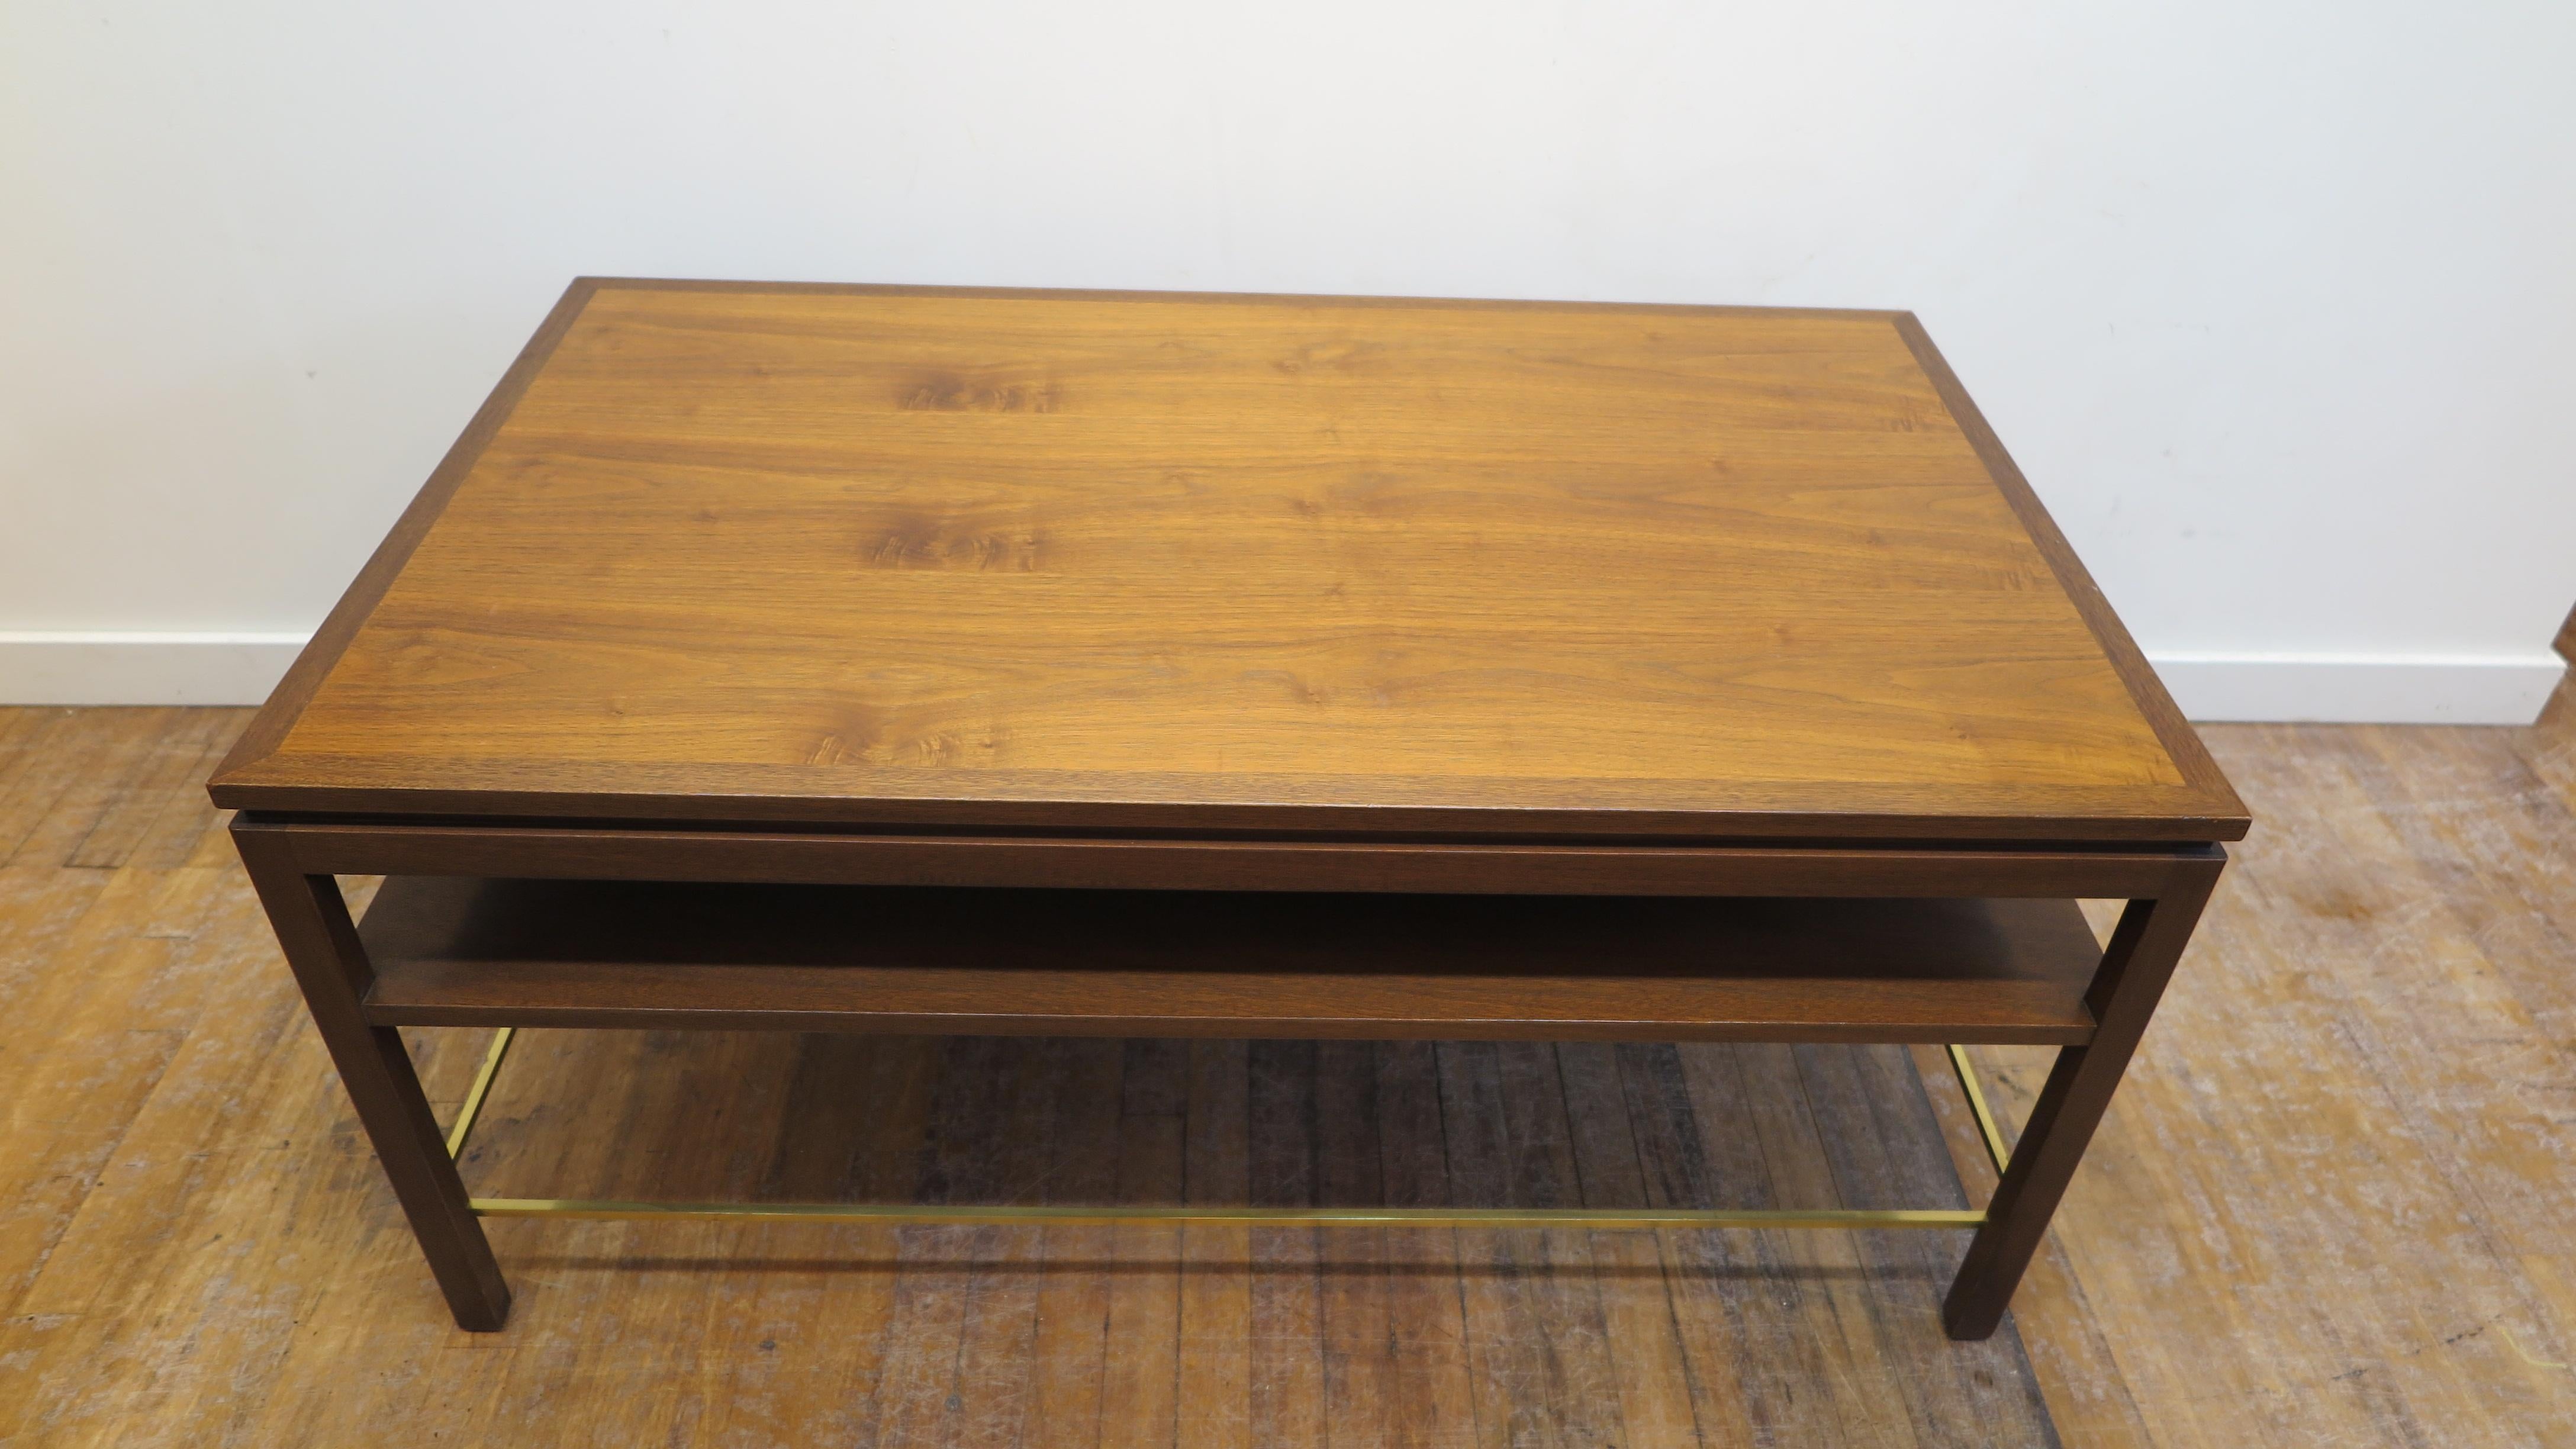 Dunbar cocktail table designed by Edward Wormley for Dunbar. Coffee table in two tone walnut with lower shelf and brass stretcher. Very good original condition. 
Very light wear to the top.